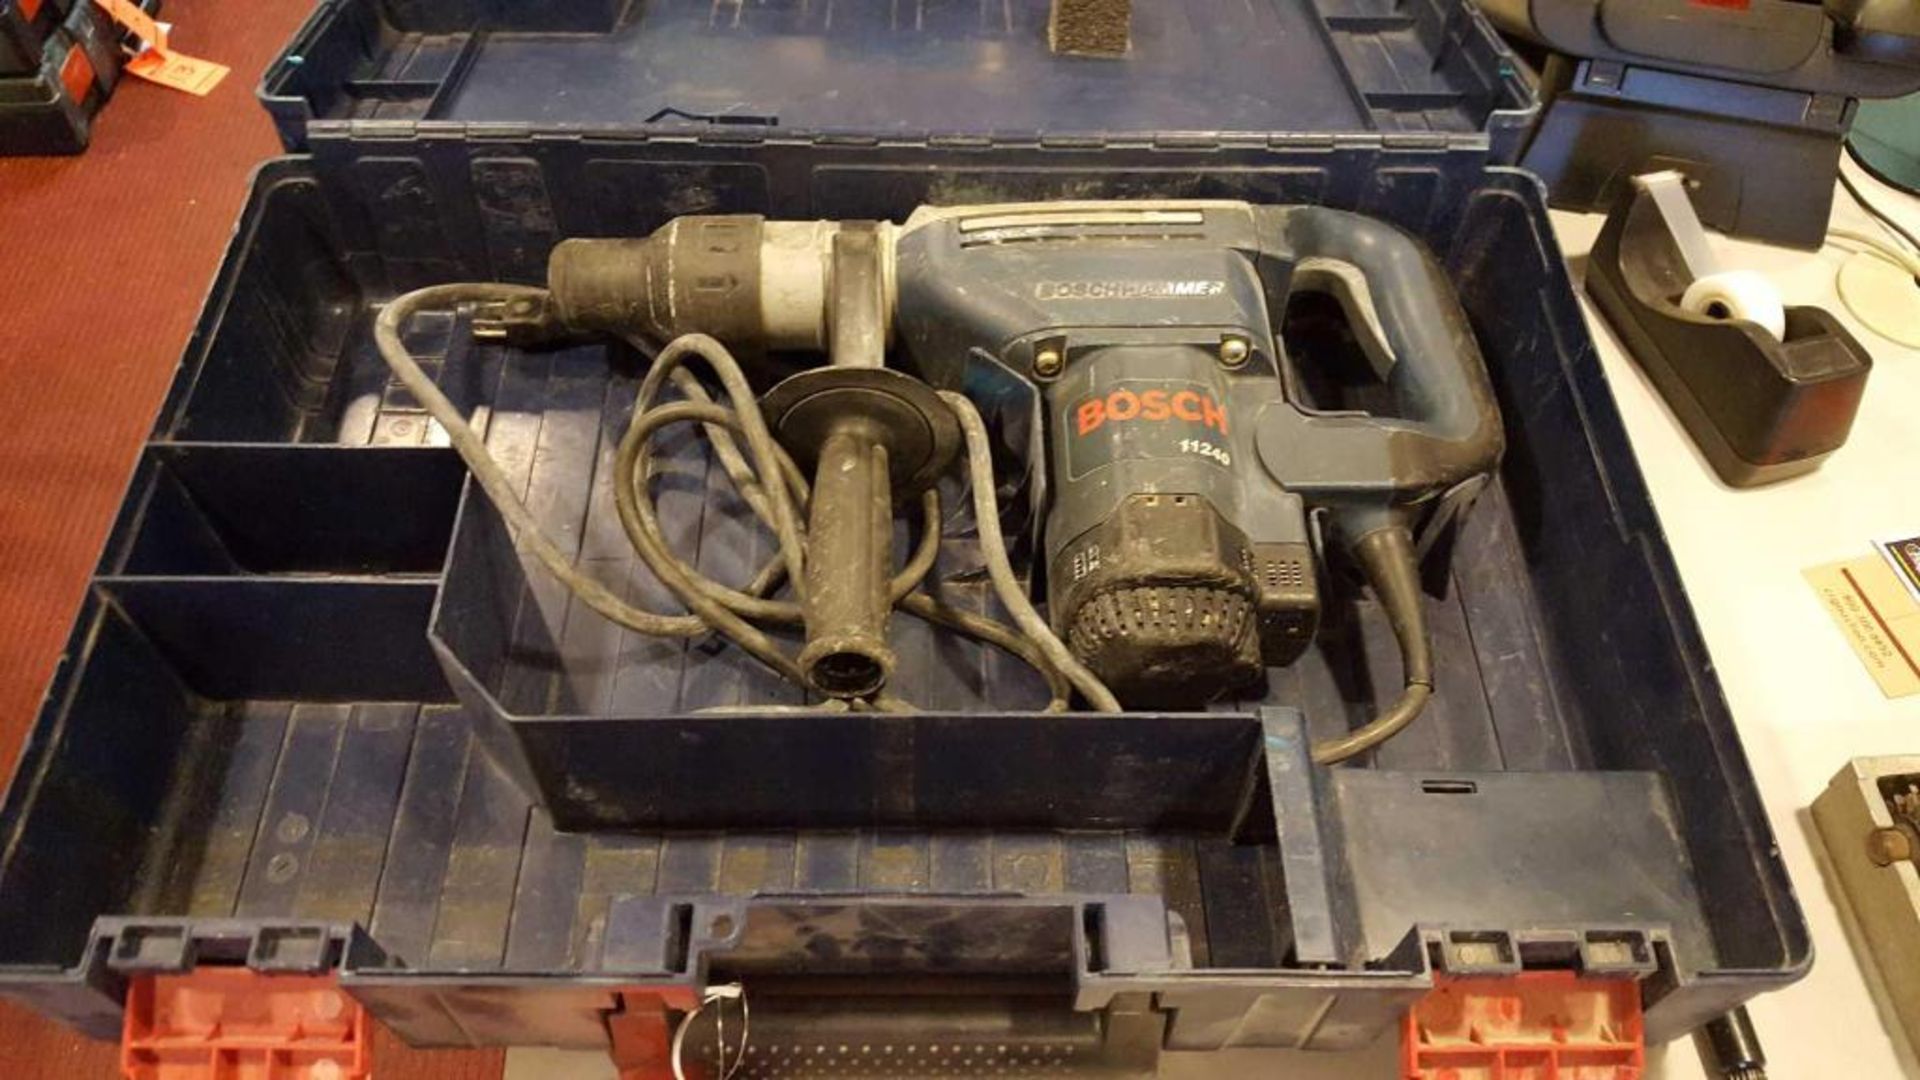 Bosch electric hammer drill, model number 112 40 with case